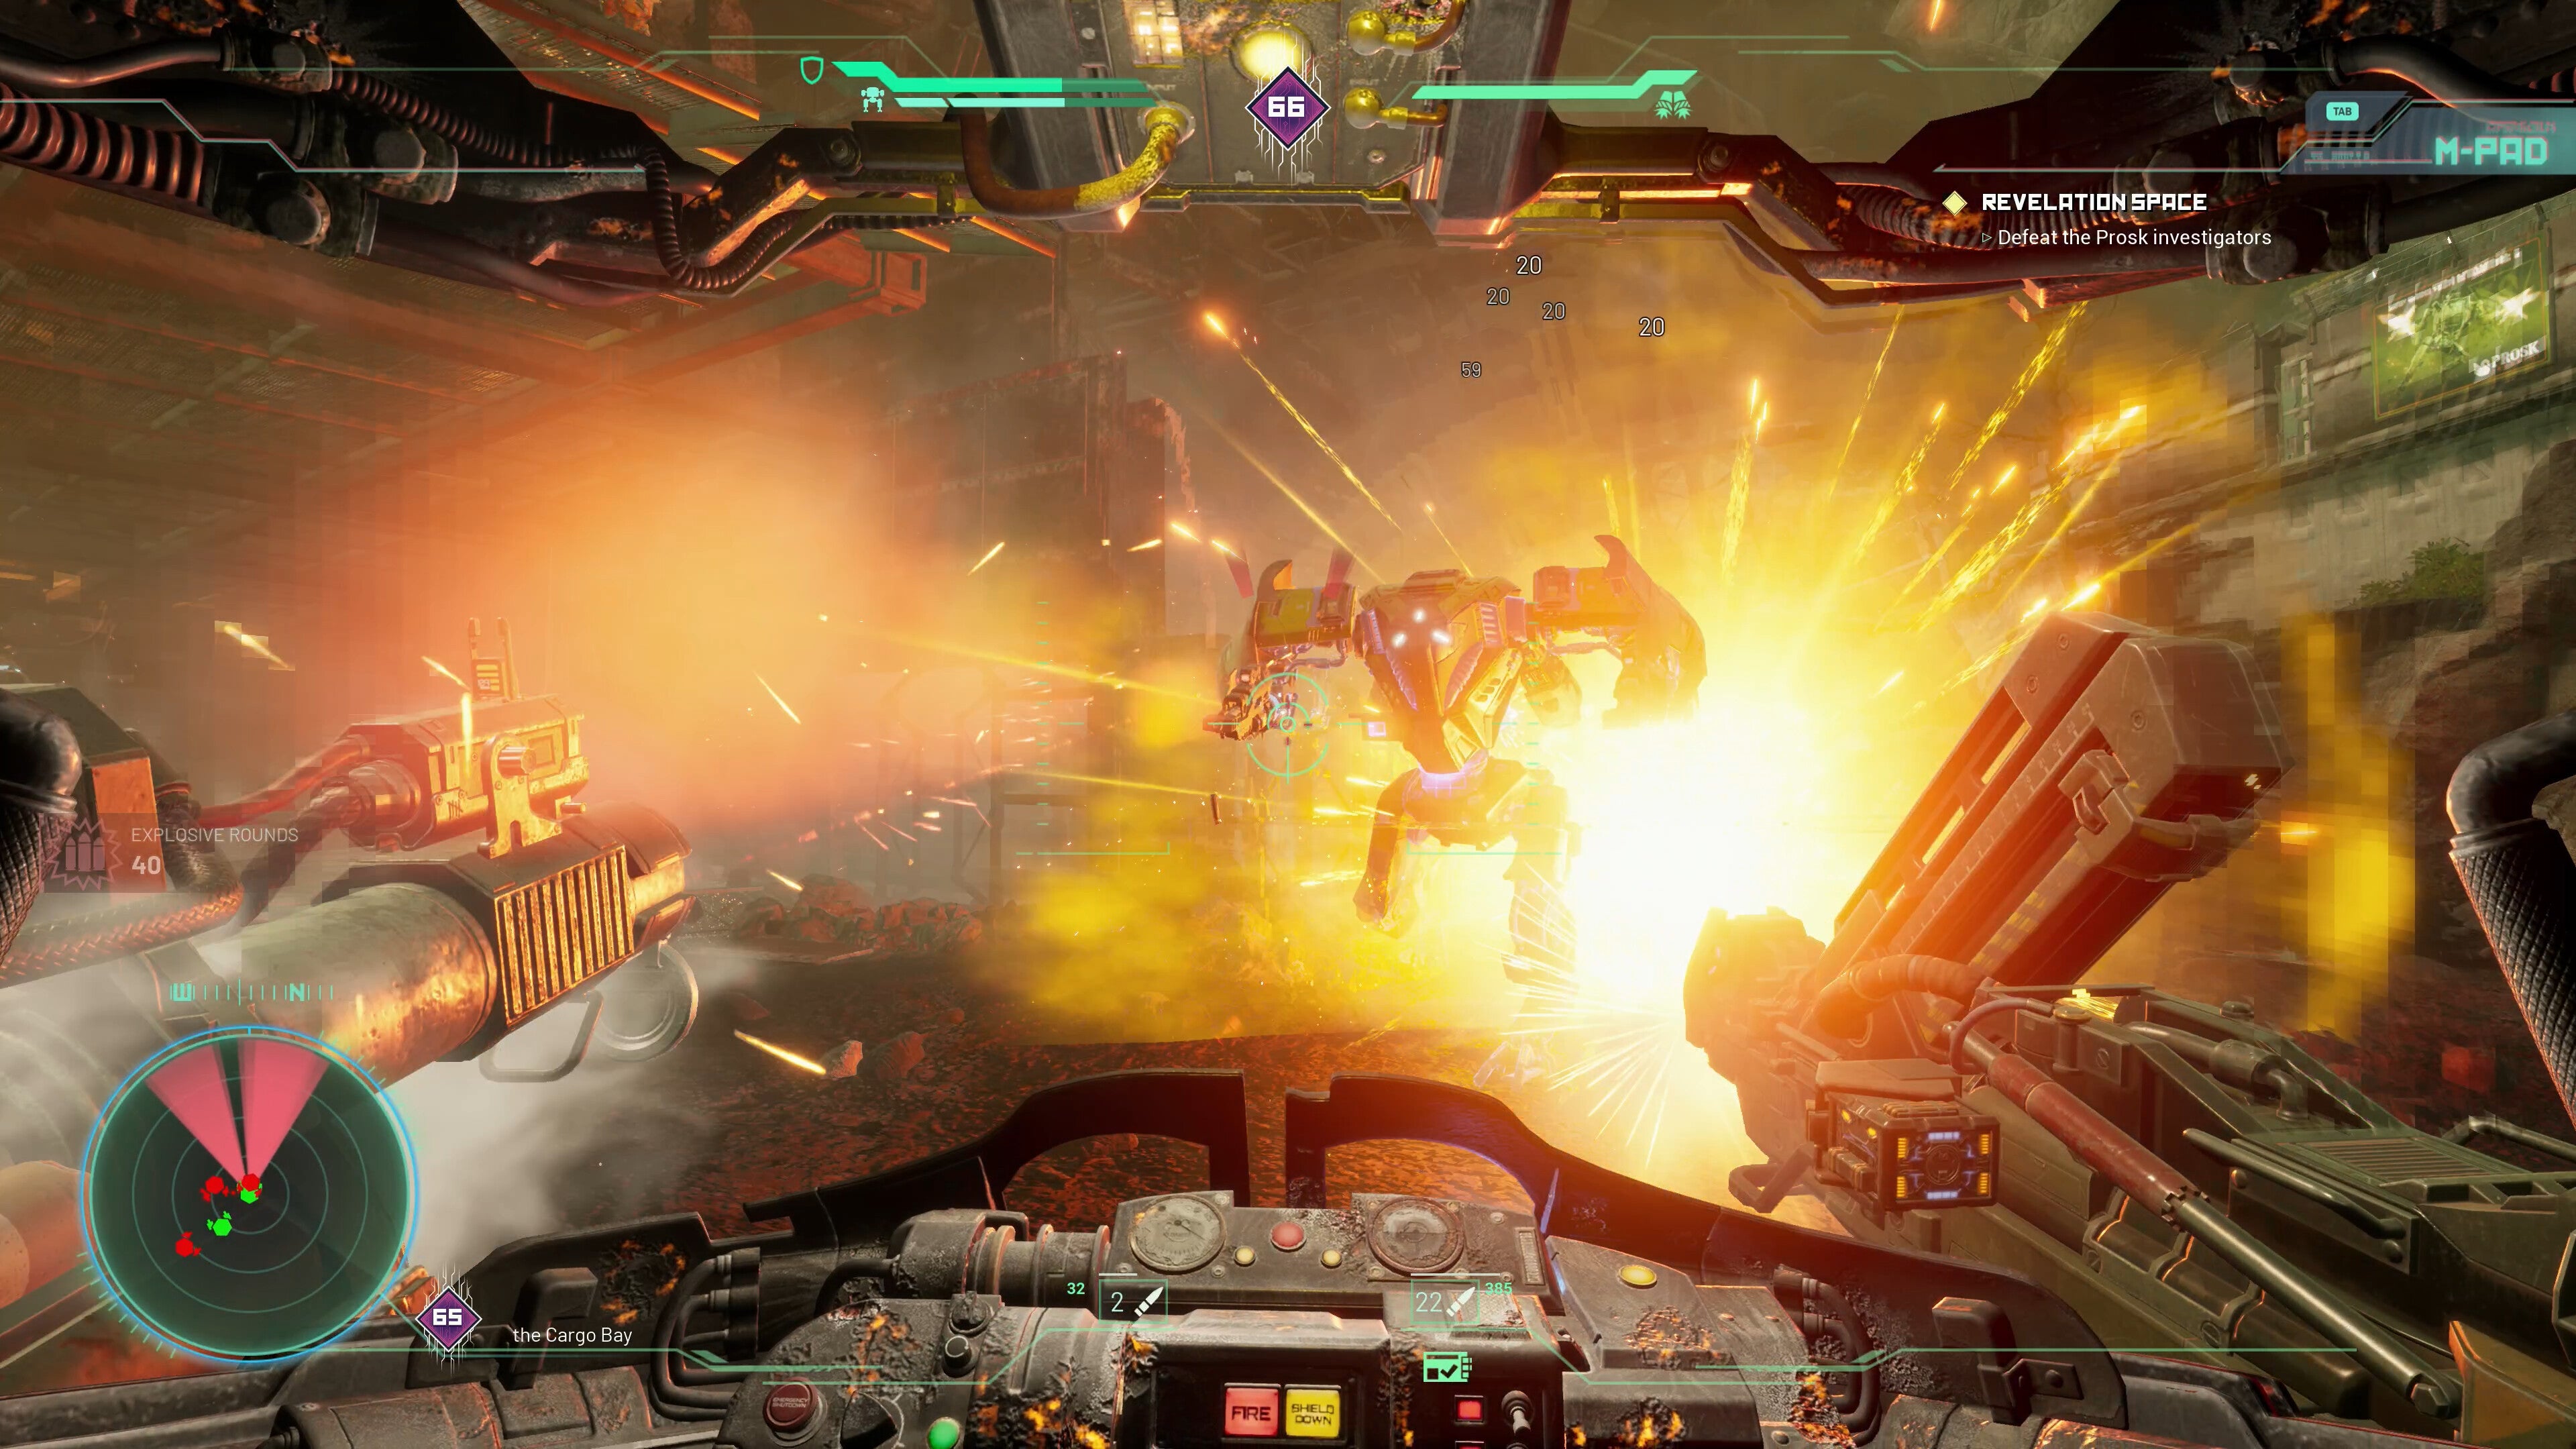 Mech shooter Hawken returns with a free-to-play PvE game Rock Paper Shotgun